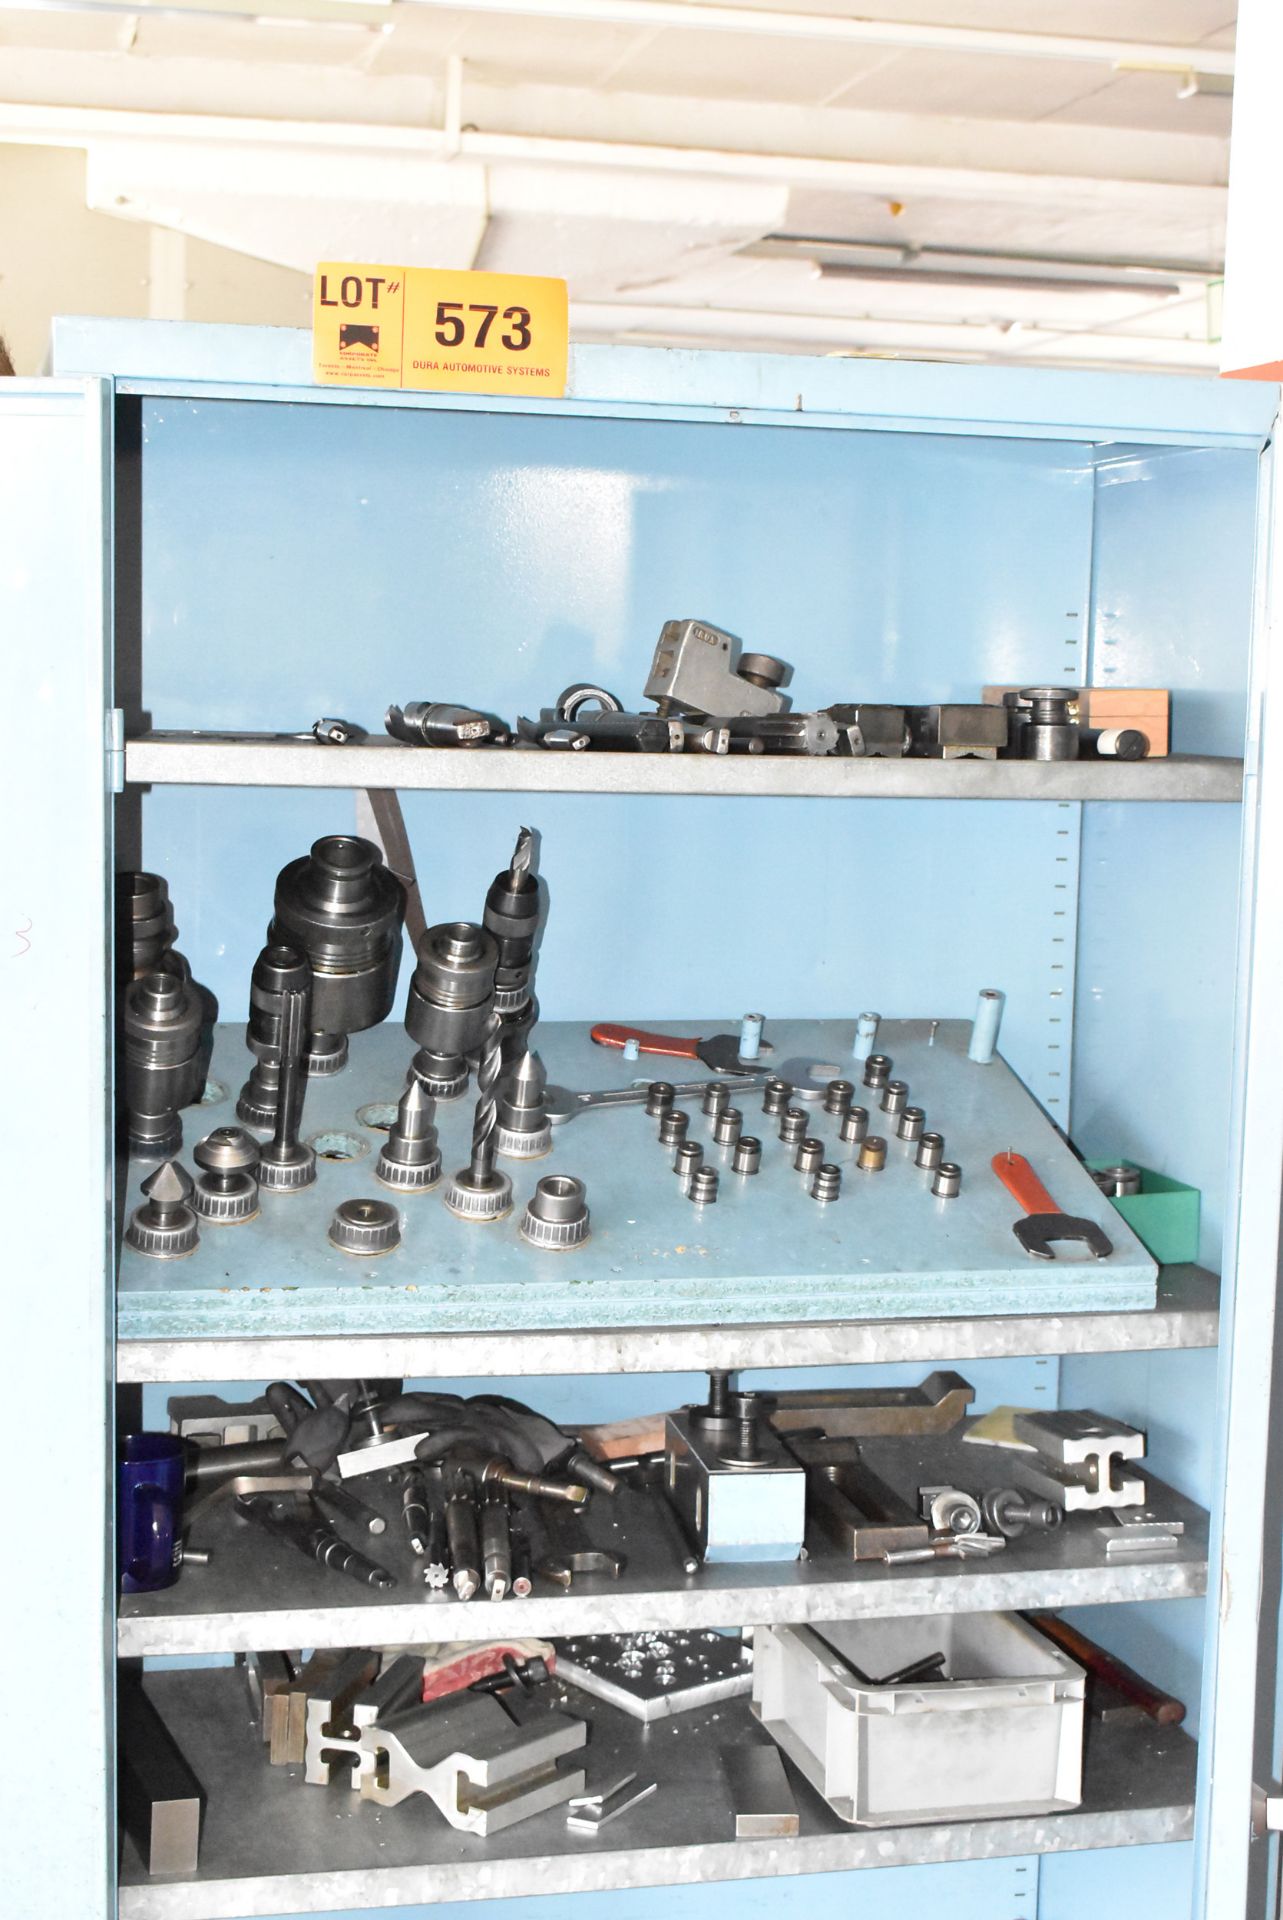 LOT/ MILLING TOOLING WITH CABINET (BAU 57) [Removal Fee = € 55 + applicable VAT - Gerritsen Projects